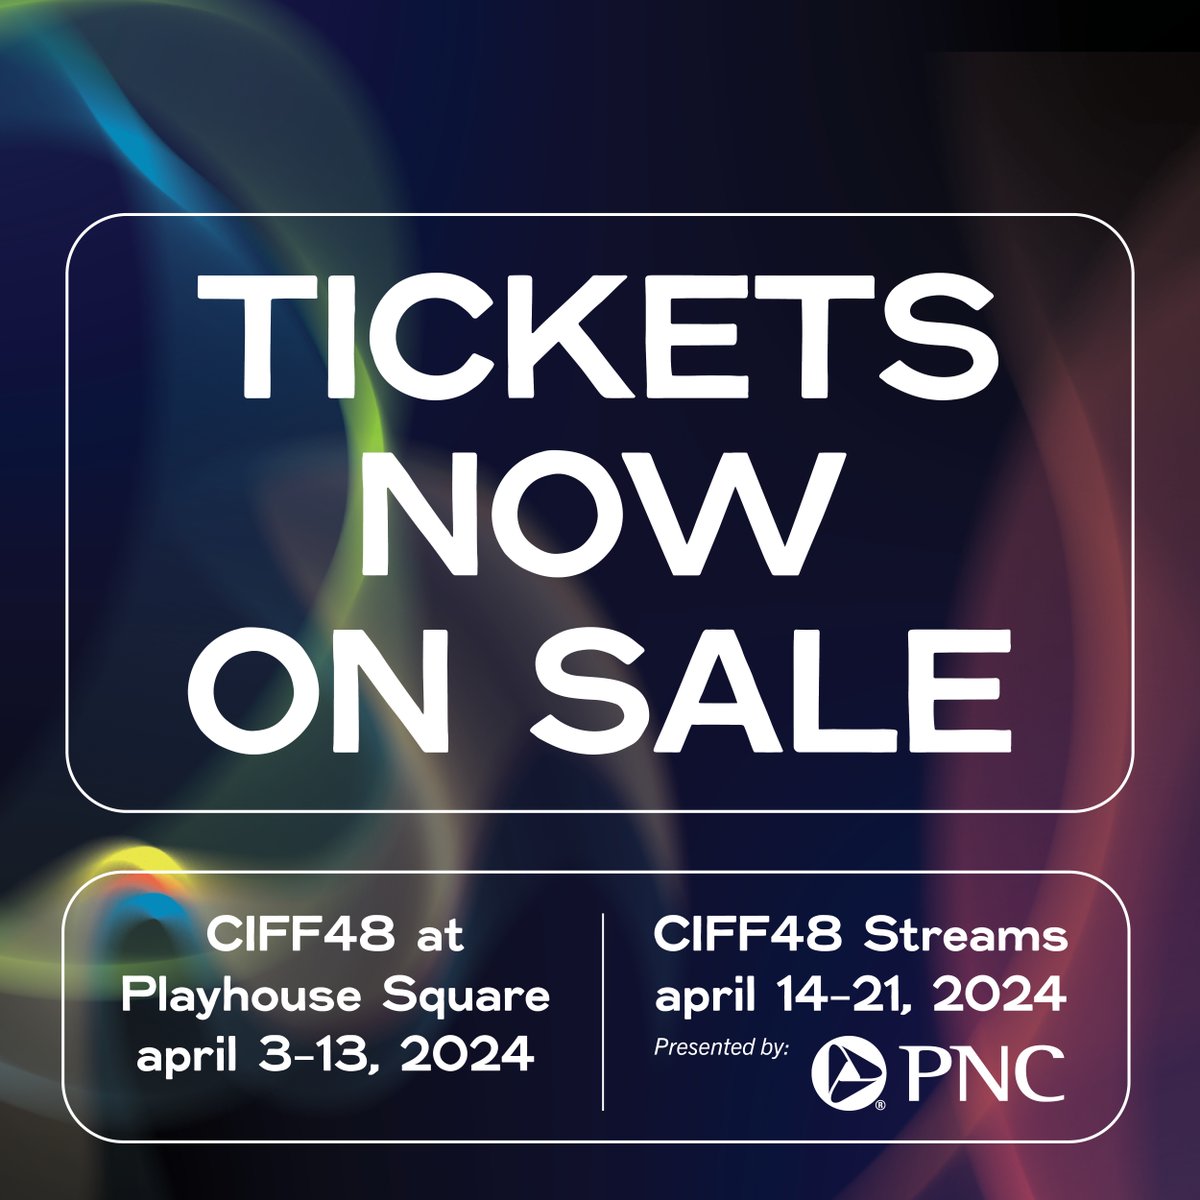 Tickets to the 48th @CIFF are on sale! 

More than 360 films are part of this year’s lineup, including our partnered film Minted. Use discount code CMA to receive $1 off each ticket purchase! : clevelandfilm.org #CIFF48